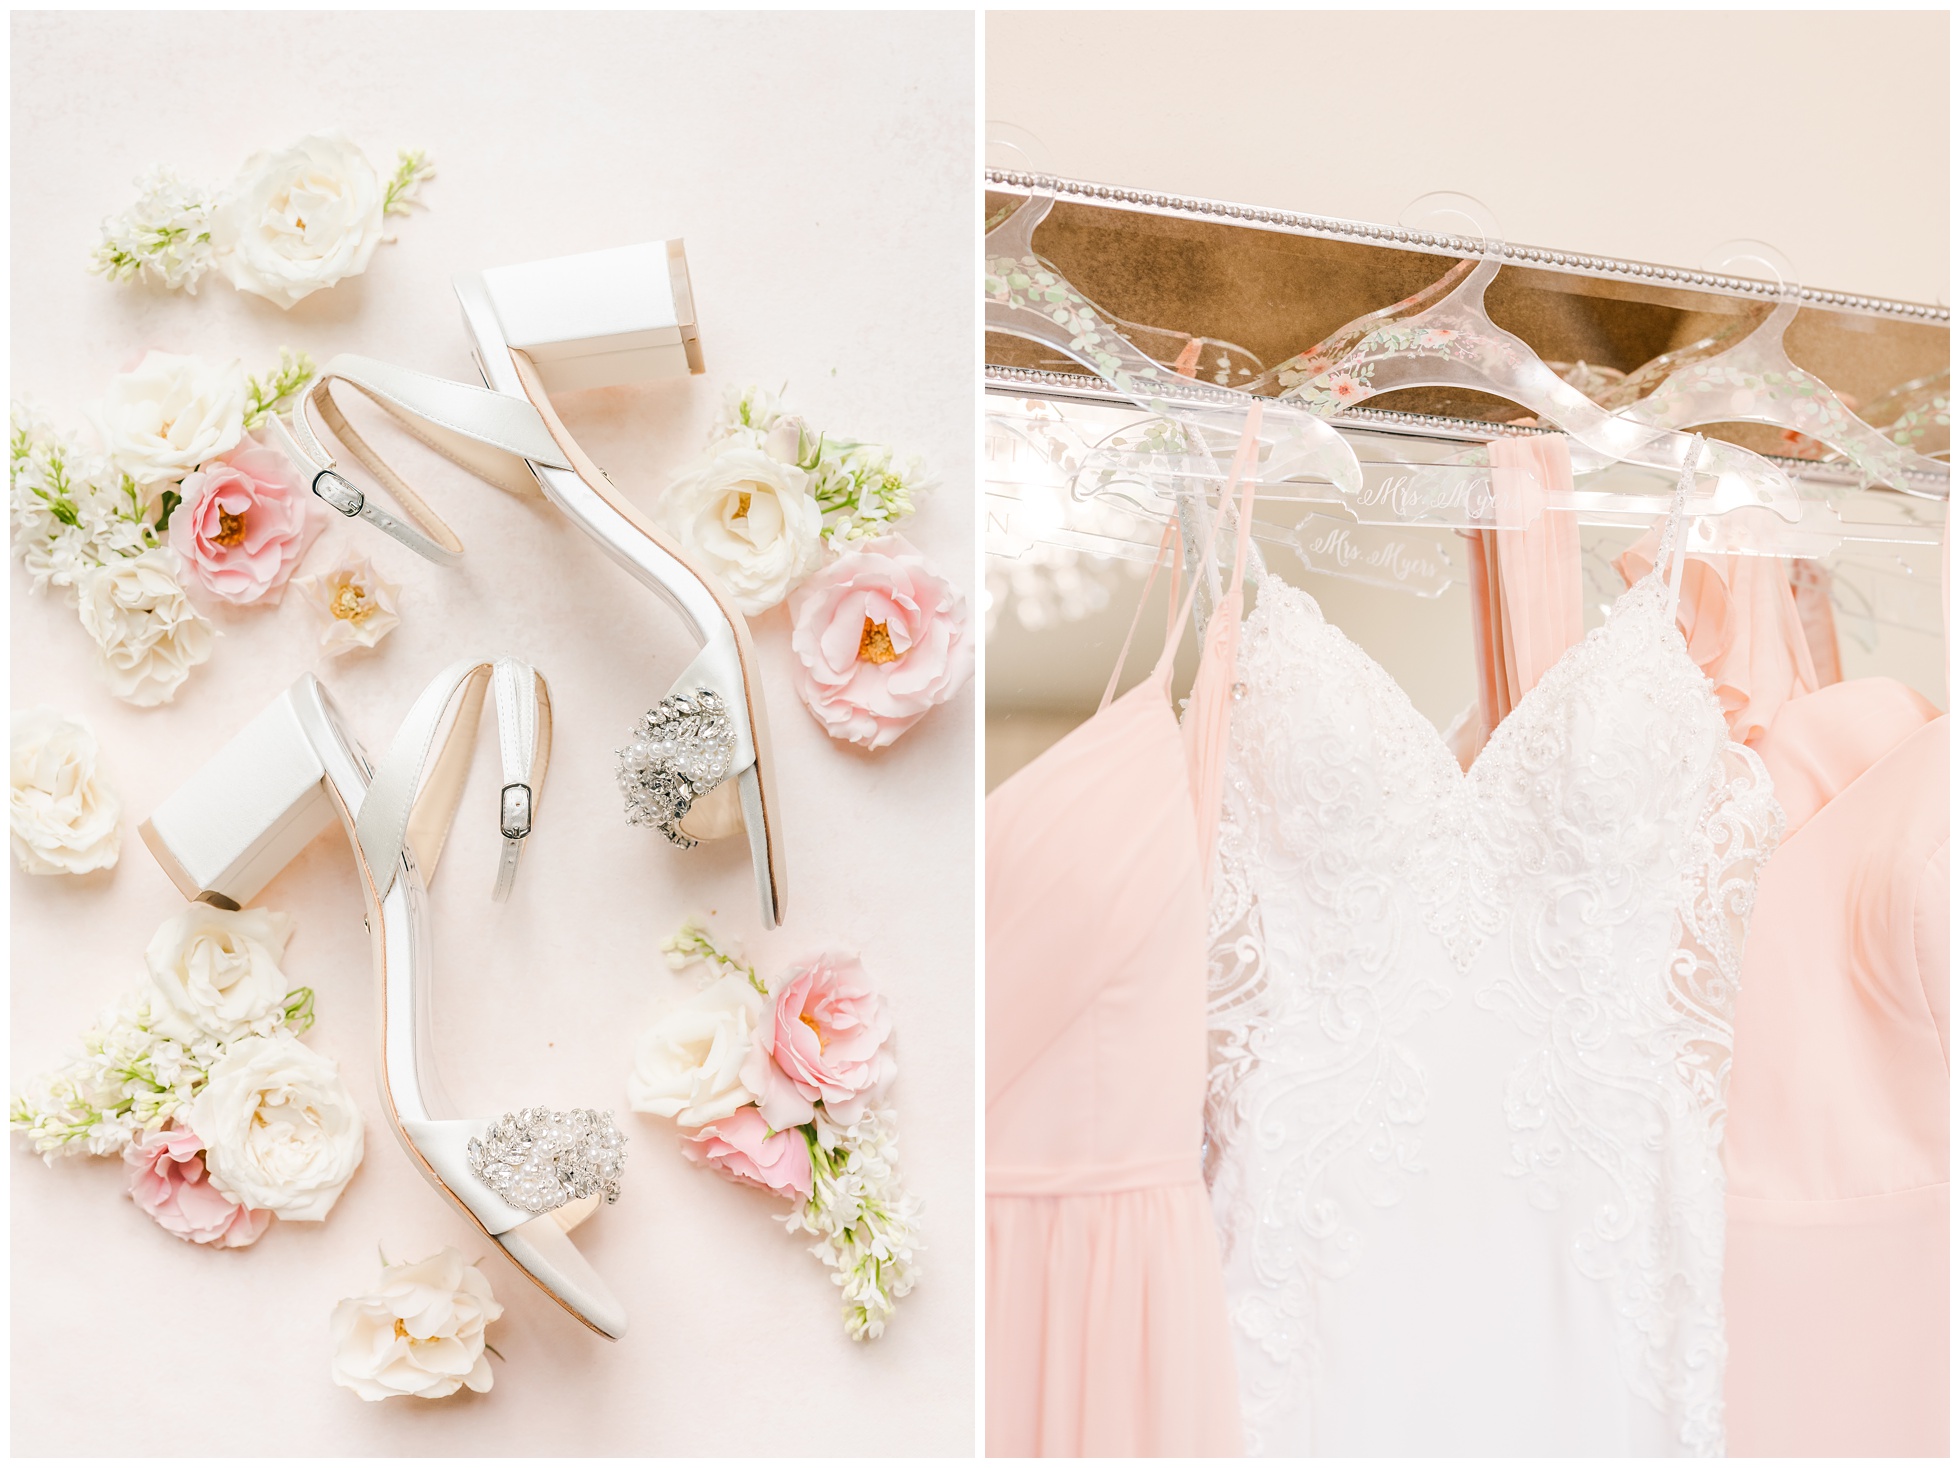 blush wedding shoes details flatlay and hanging dresses.